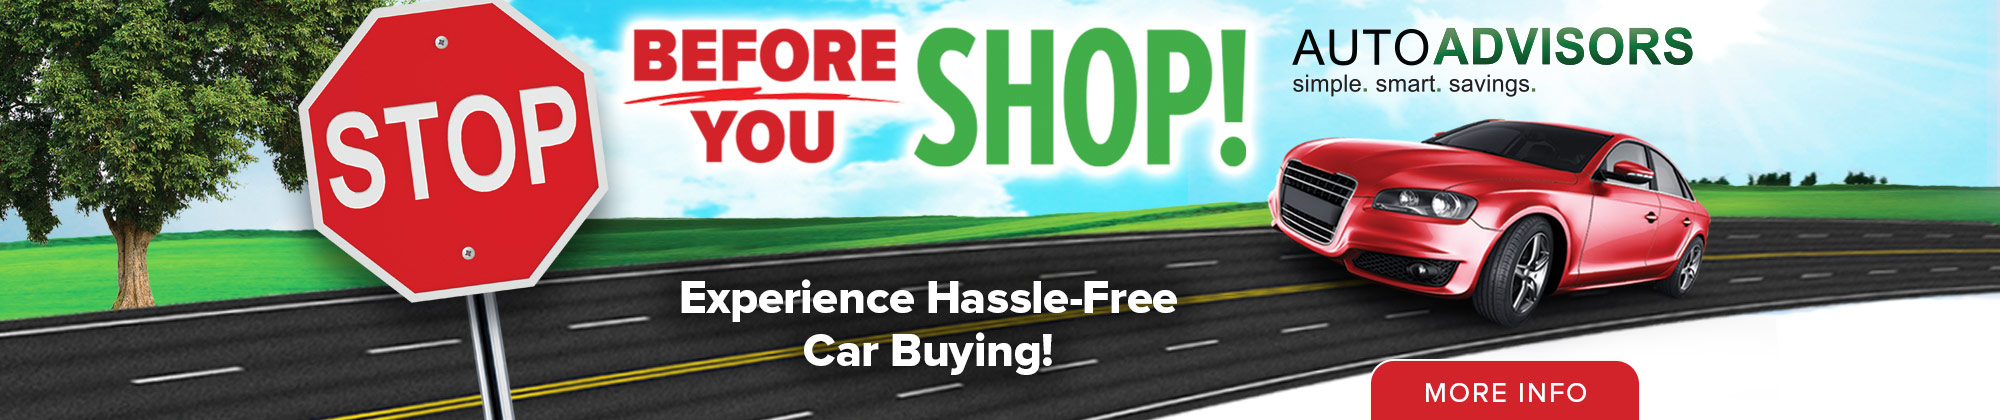 Before you shop, check out Auto Advisors.  Learn more.